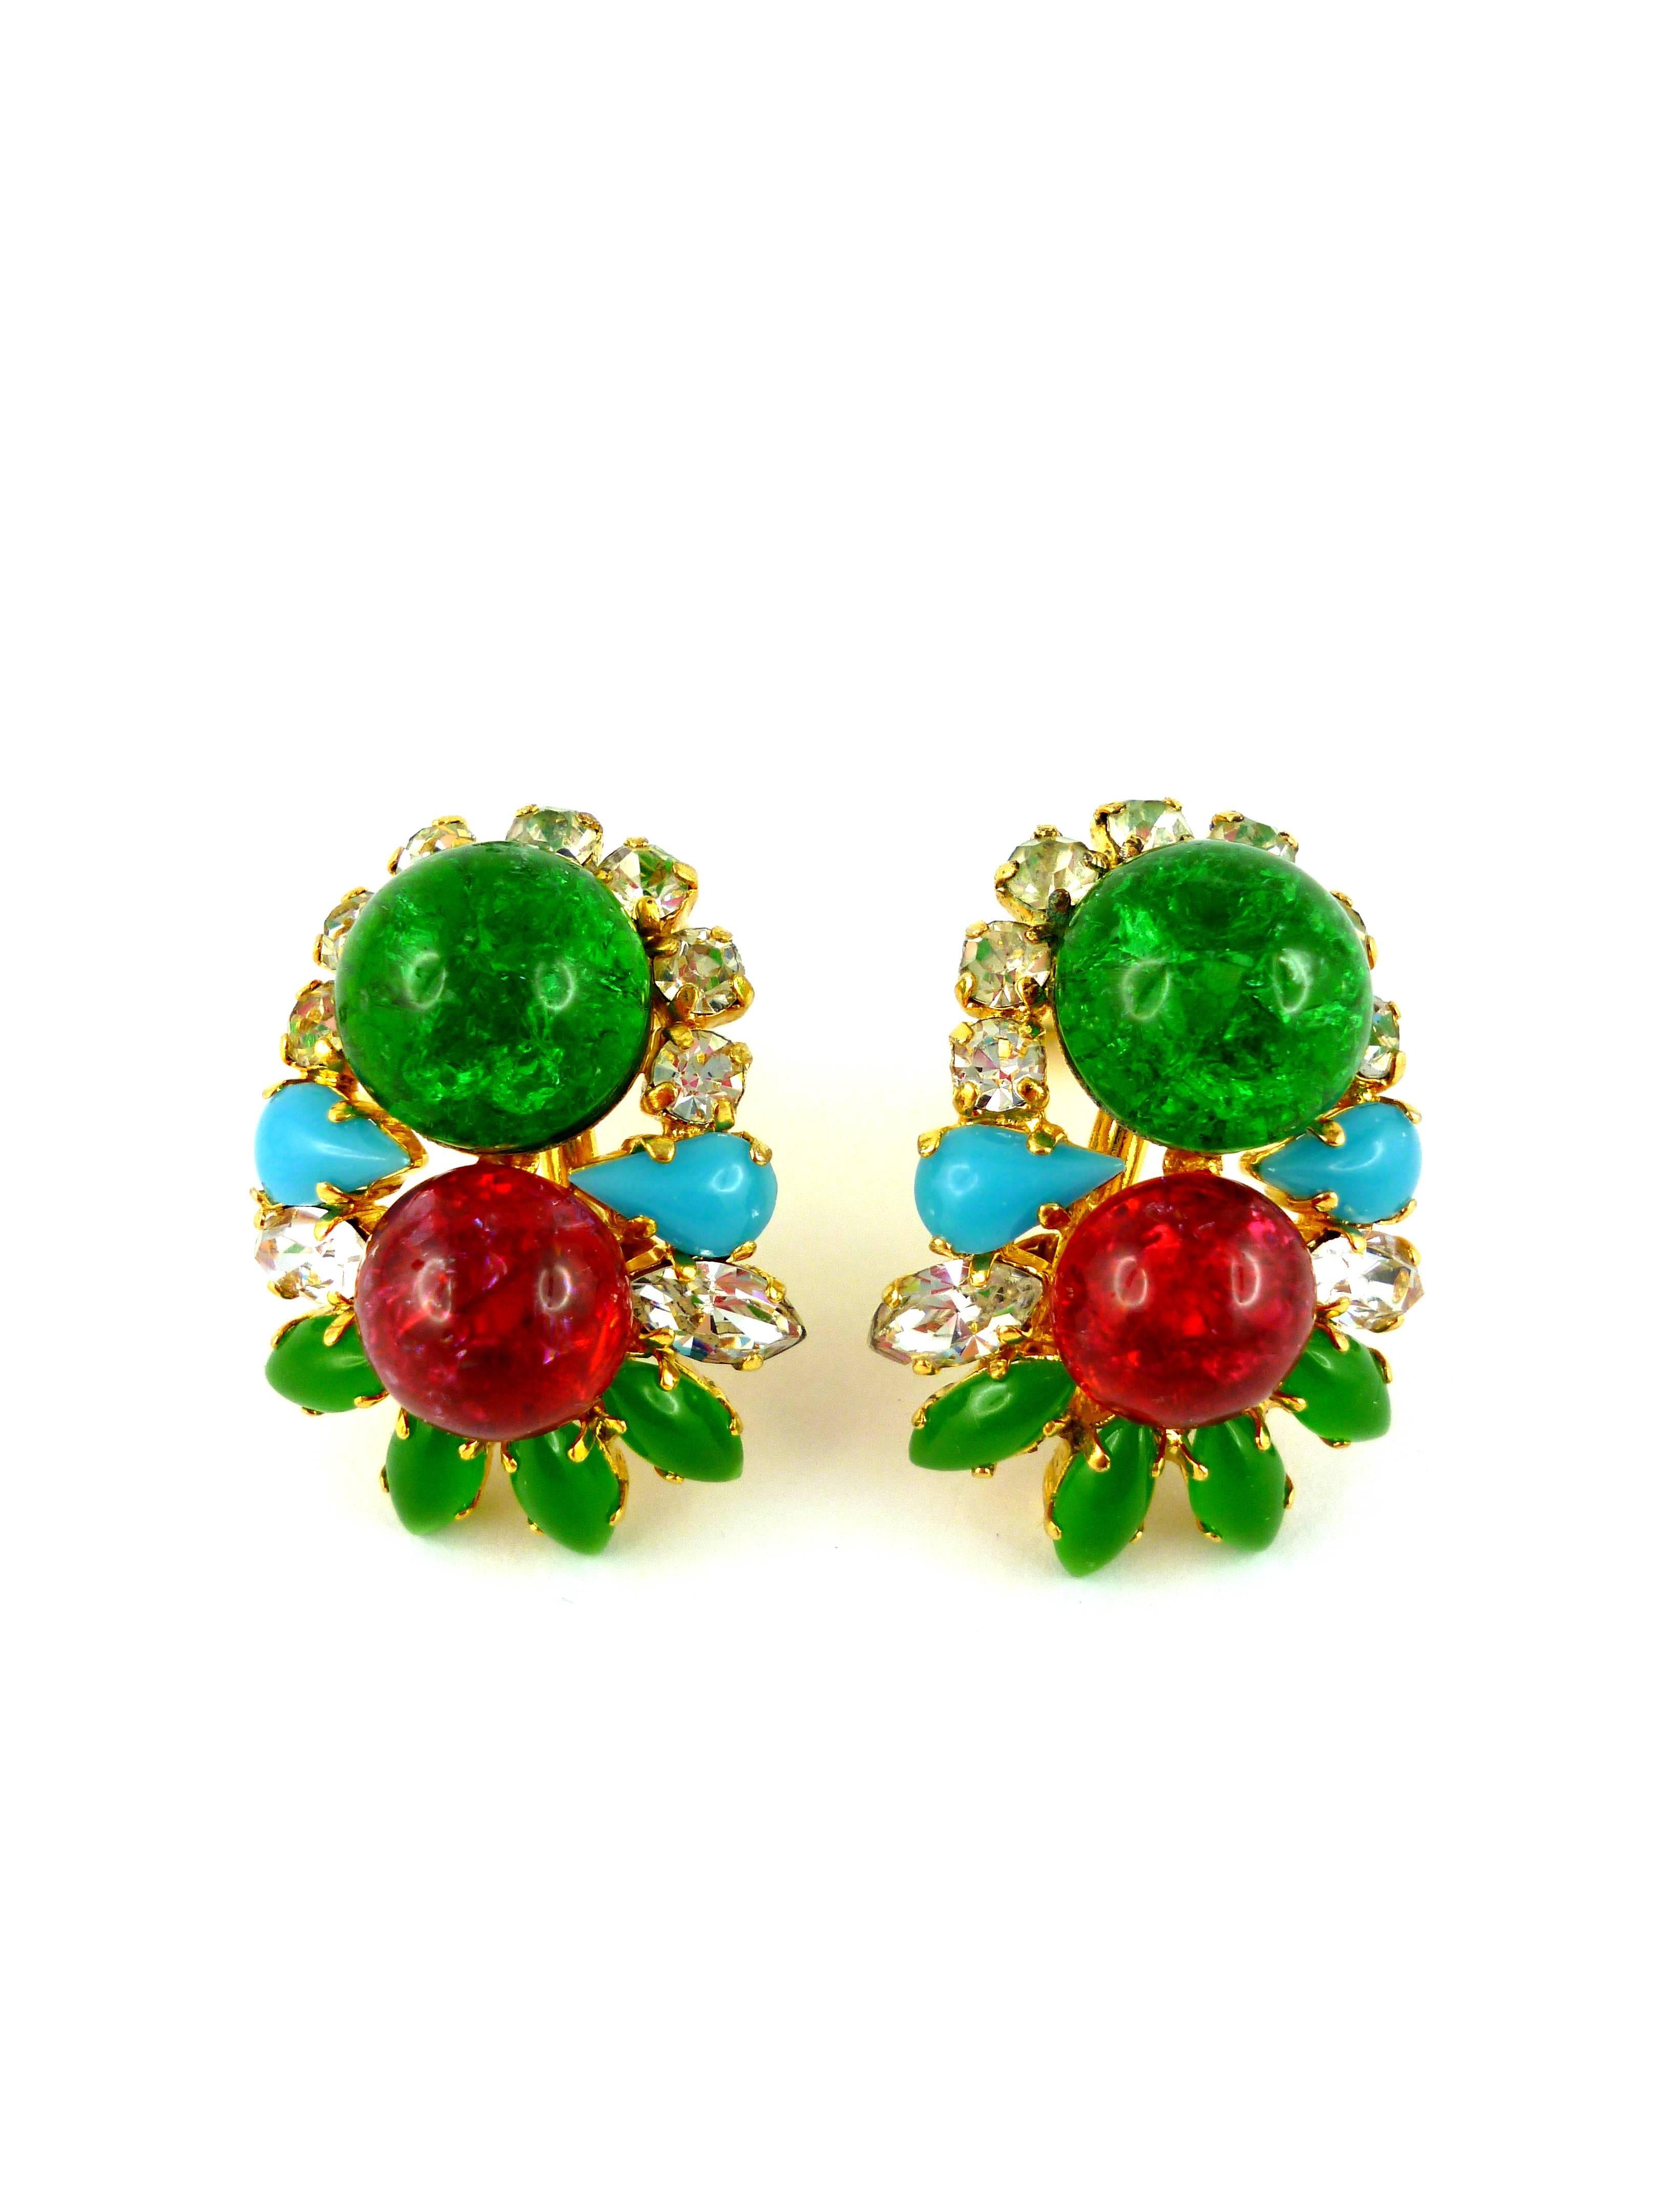 Women's Christian Dior Vintage 1967 Mughal Inspired Clip On Earrings